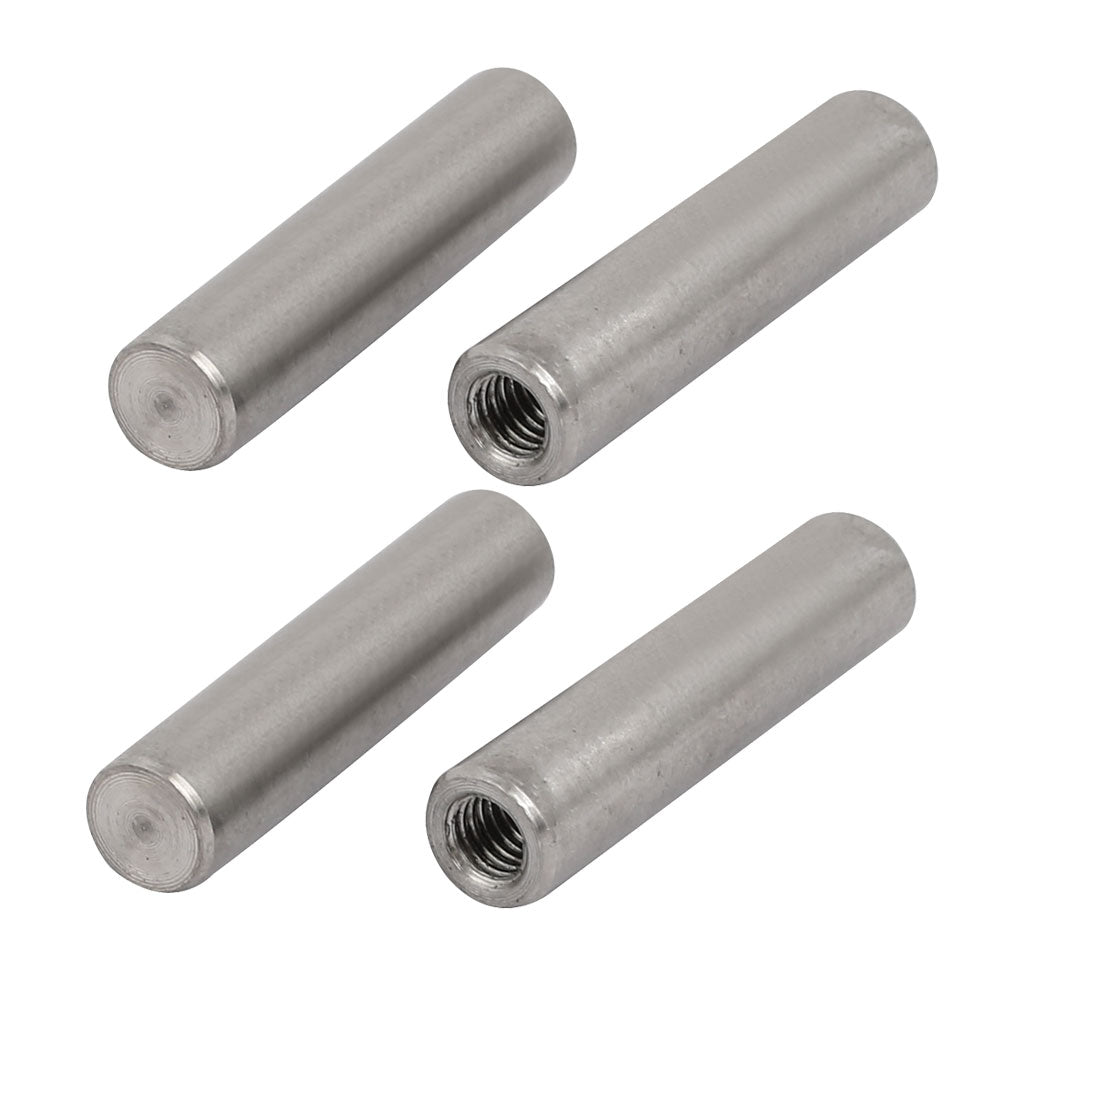 uxcell Uxcell 304 Stainless Steel M5 Female Thread 8mm x 35mm Cylindrical Dowel Pin 4pcs